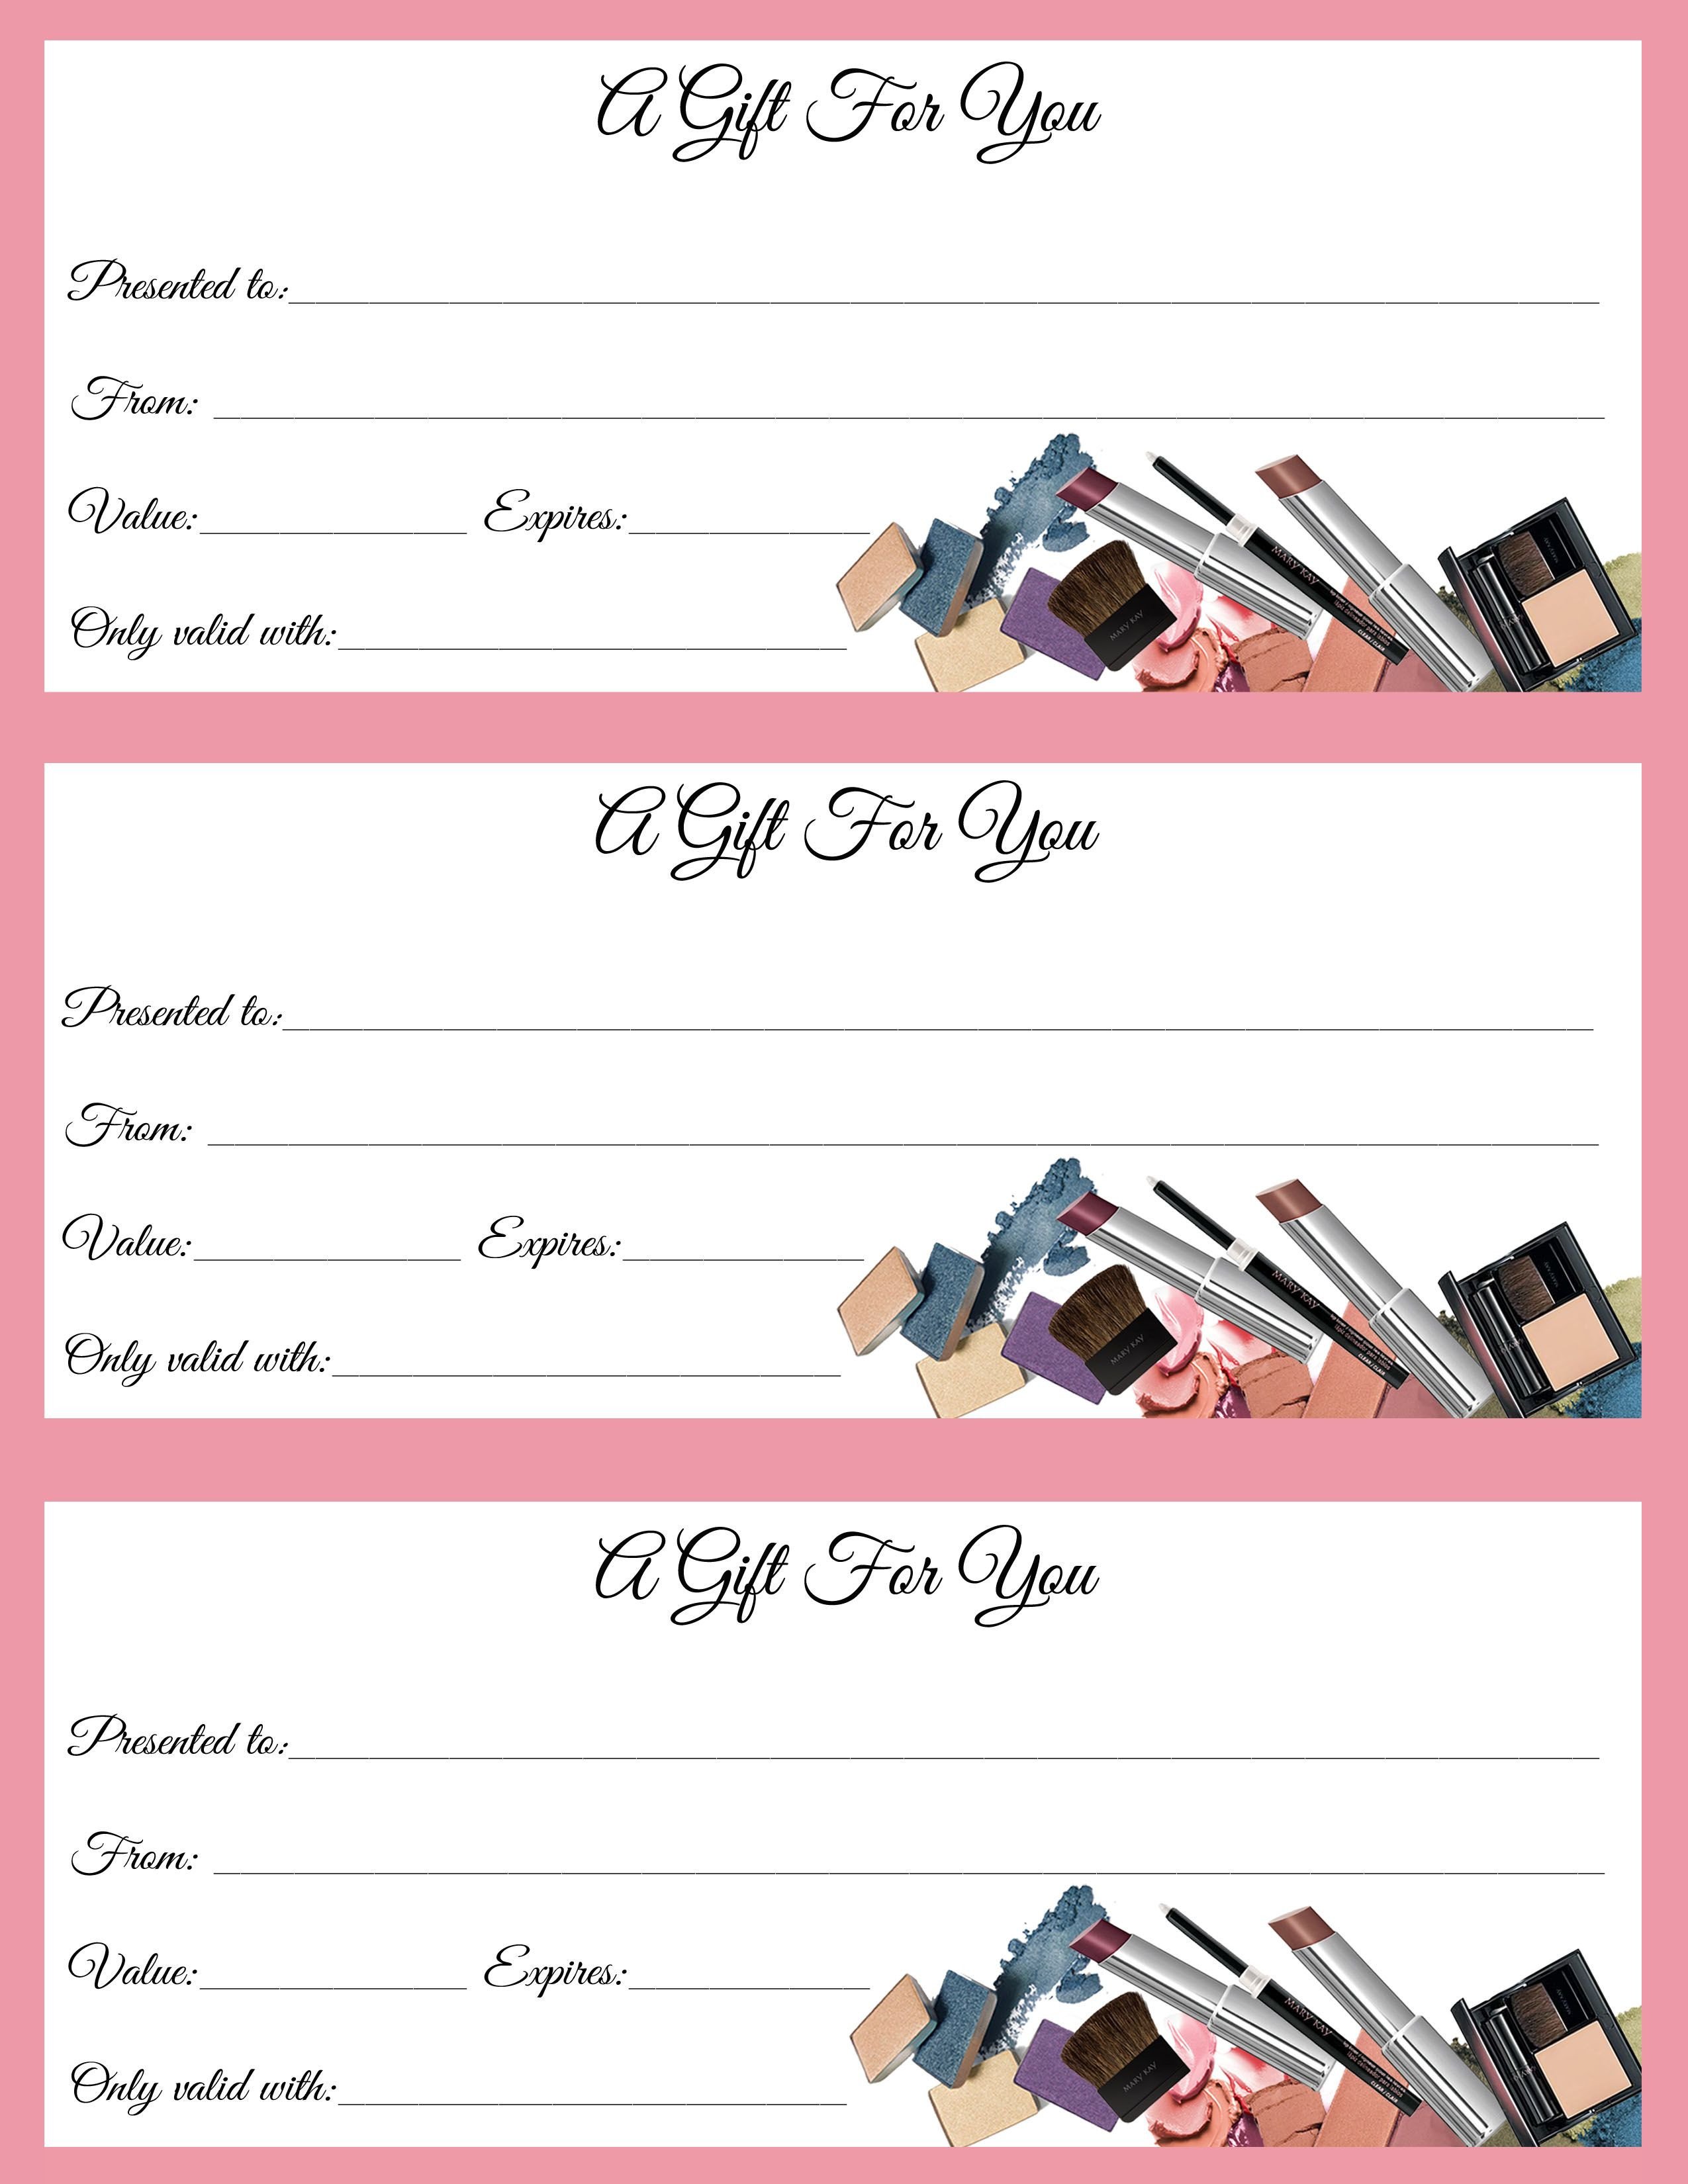 Mary Kay Gift Certificates Pdf Gift Certificates Just In Time for Call or Text to order